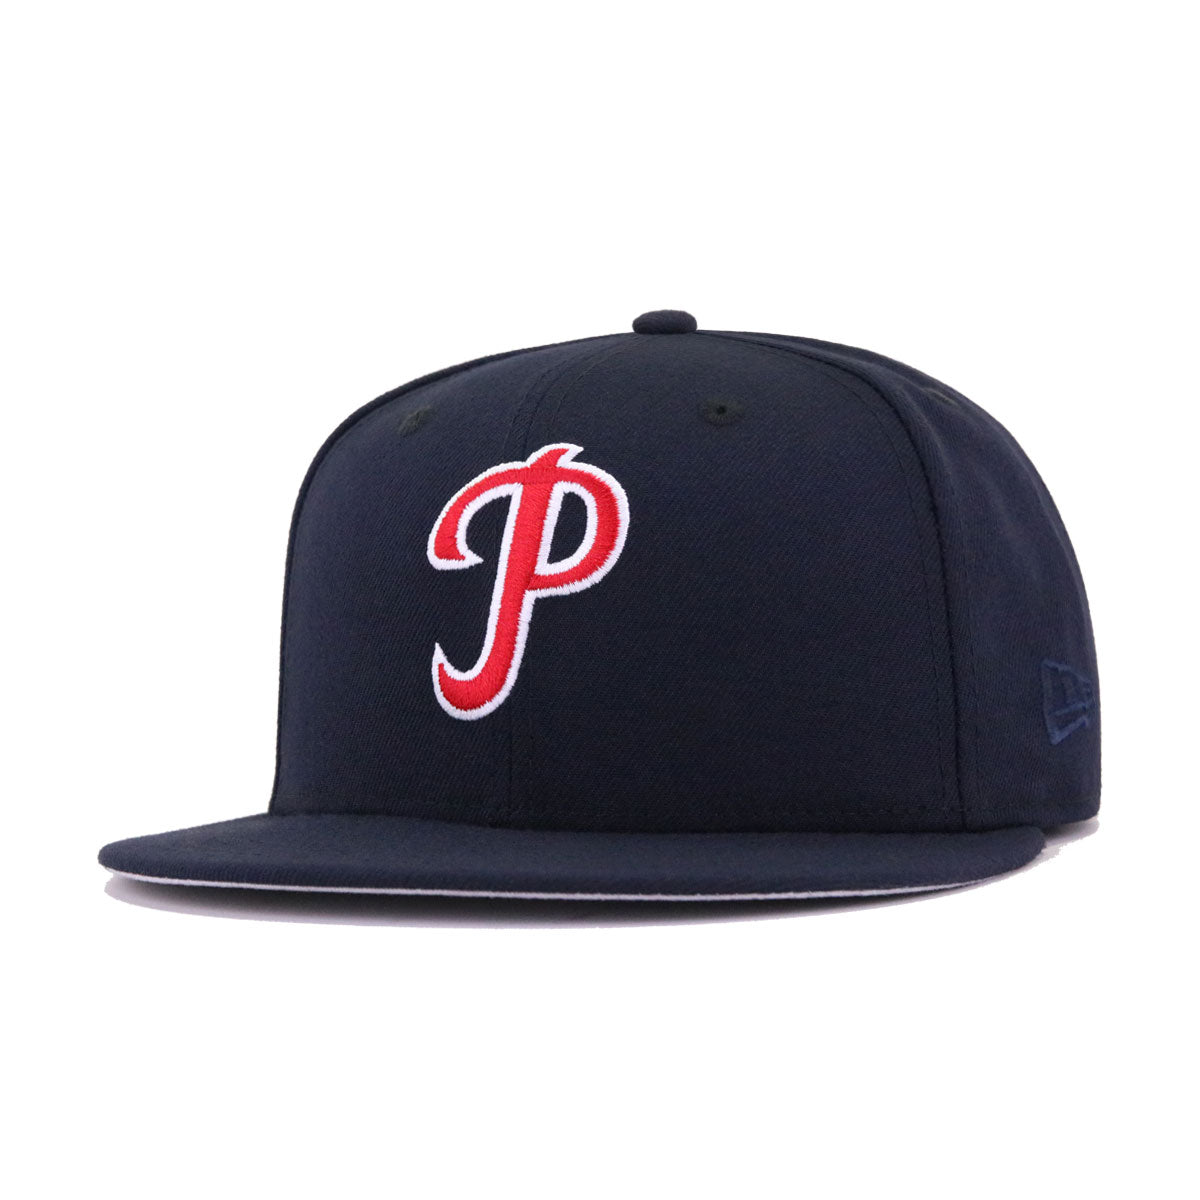 Men's New Era Gray/Blue Philadelphia Phillies Dolphin 59FIFTY Fitted Hat